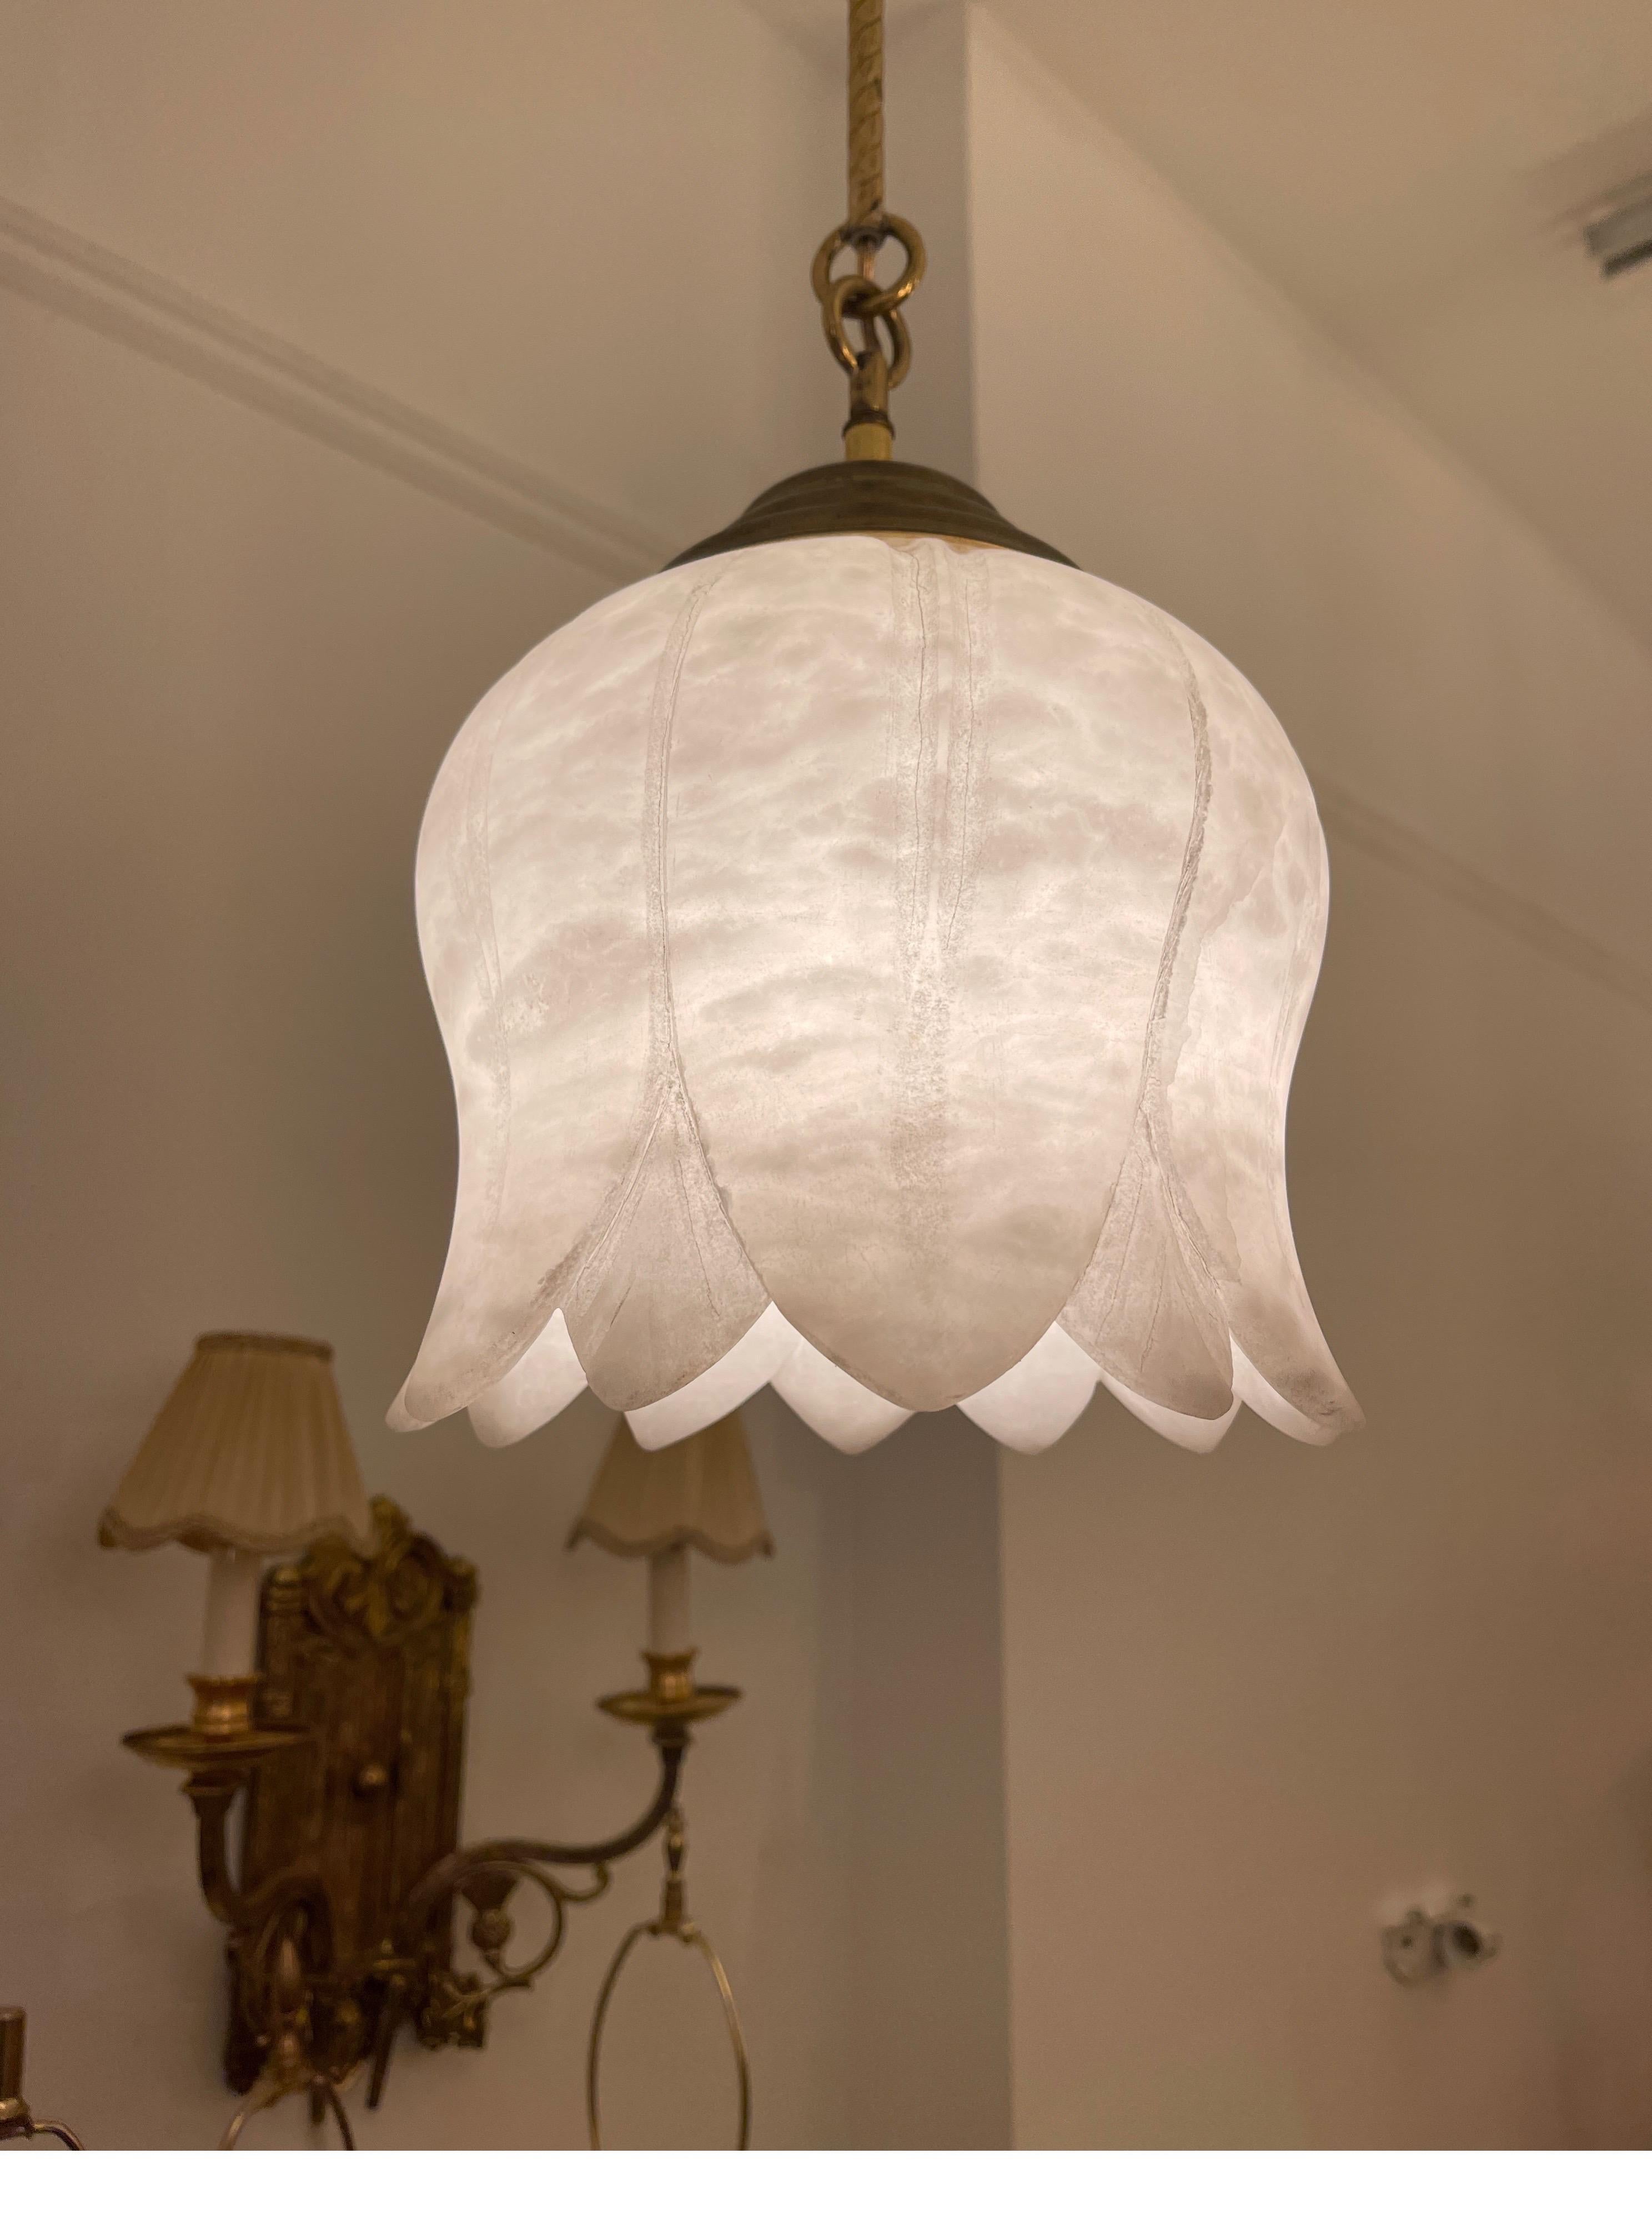 A single downward, facing flower, is mounted on, turned and reeded brass rods. One bulb illuminates the alabaster shade, which is in mineralized white alabaster.